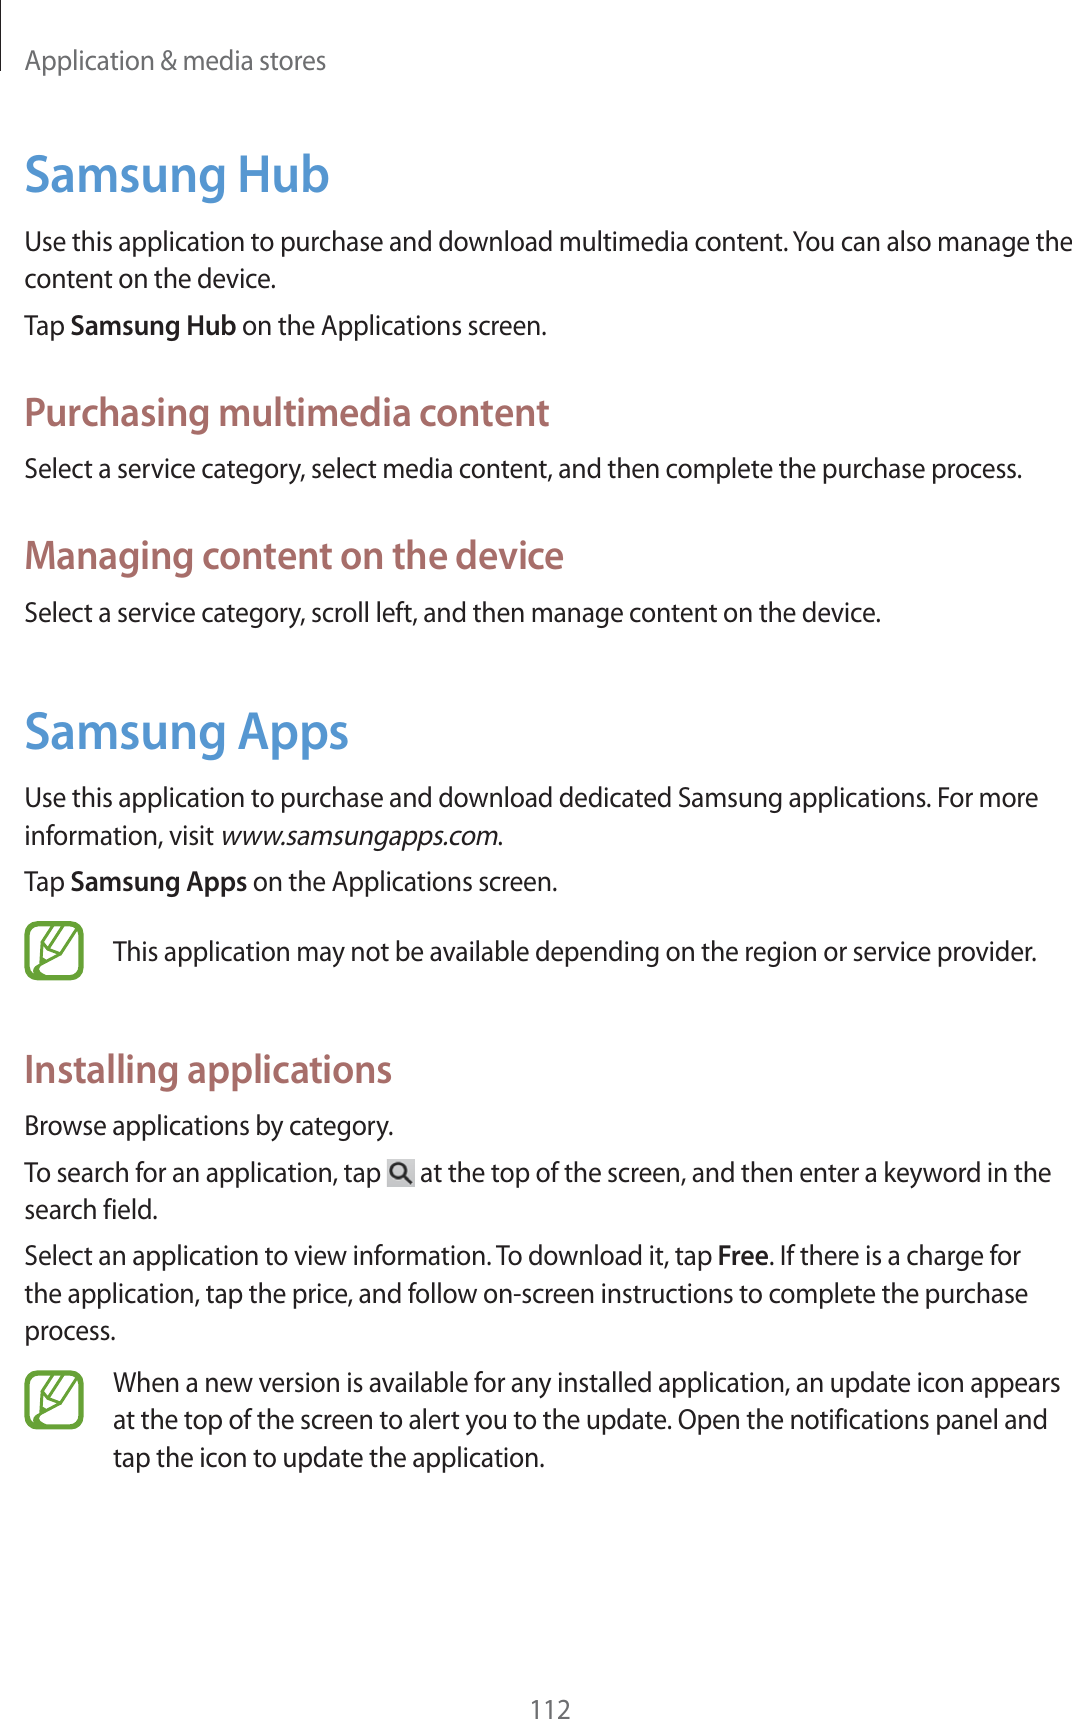 Application &amp; media stores112Samsung HubUse this application to purchase and download multimedia content. You can also manage the content on the device.Tap Samsung Hub on the Applications screen.Purchasing multimedia contentSelect a service category, select media content, and then complete the purchase process.Managing content on the deviceSelect a service category, scroll left, and then manage content on the device.Samsung AppsUse this application to purchase and download dedicated Samsung applications. For more information, visit www.samsungapps.com.Tap Samsung Apps on the Applications screen.This application may not be available depending on the region or service provider.Installing applicationsBrowse applications by category.To search for an application, tap   at the top of the screen, and then enter a keyword in the search field.Select an application to view information. To download it, tap Free. If there is a charge for the application, tap the price, and follow on-screen instructions to complete the purchase process.When a new version is available for any installed application, an update icon appears at the top of the screen to alert you to the update. Open the notifications panel and tap the icon to update the application.